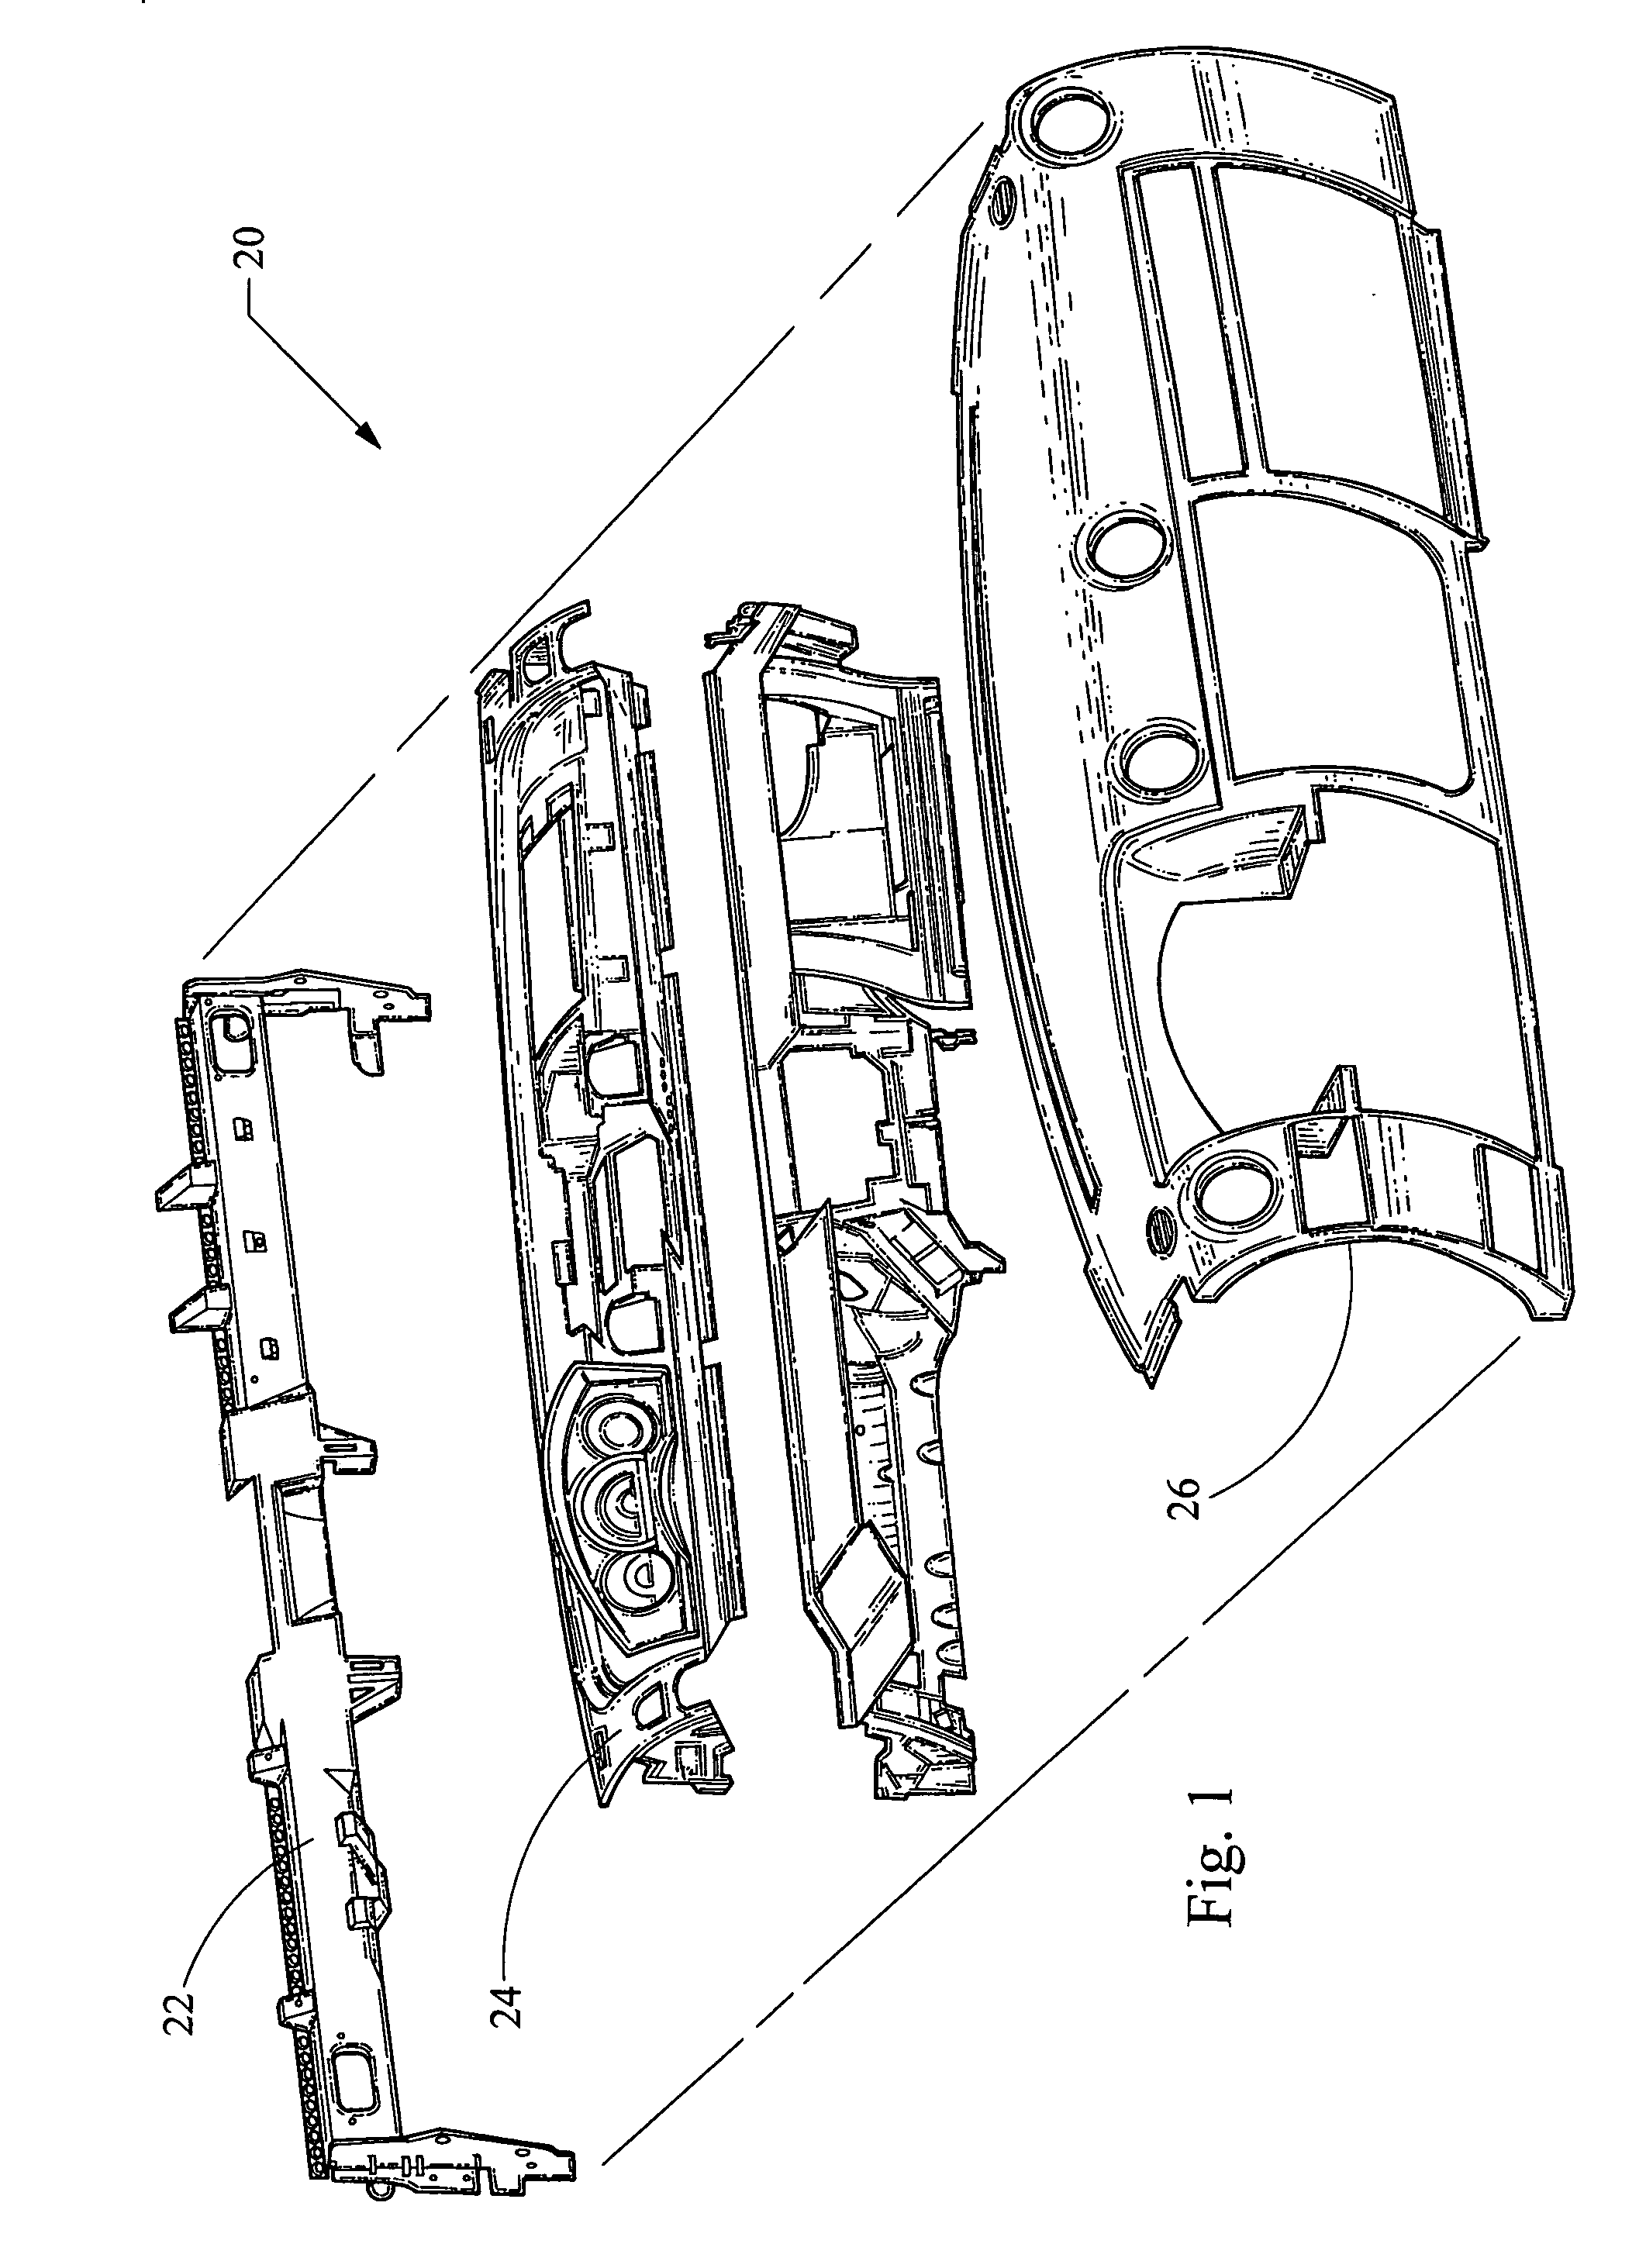 Vehicle cockpit attachment structure with integrated plastic composite functional molded features